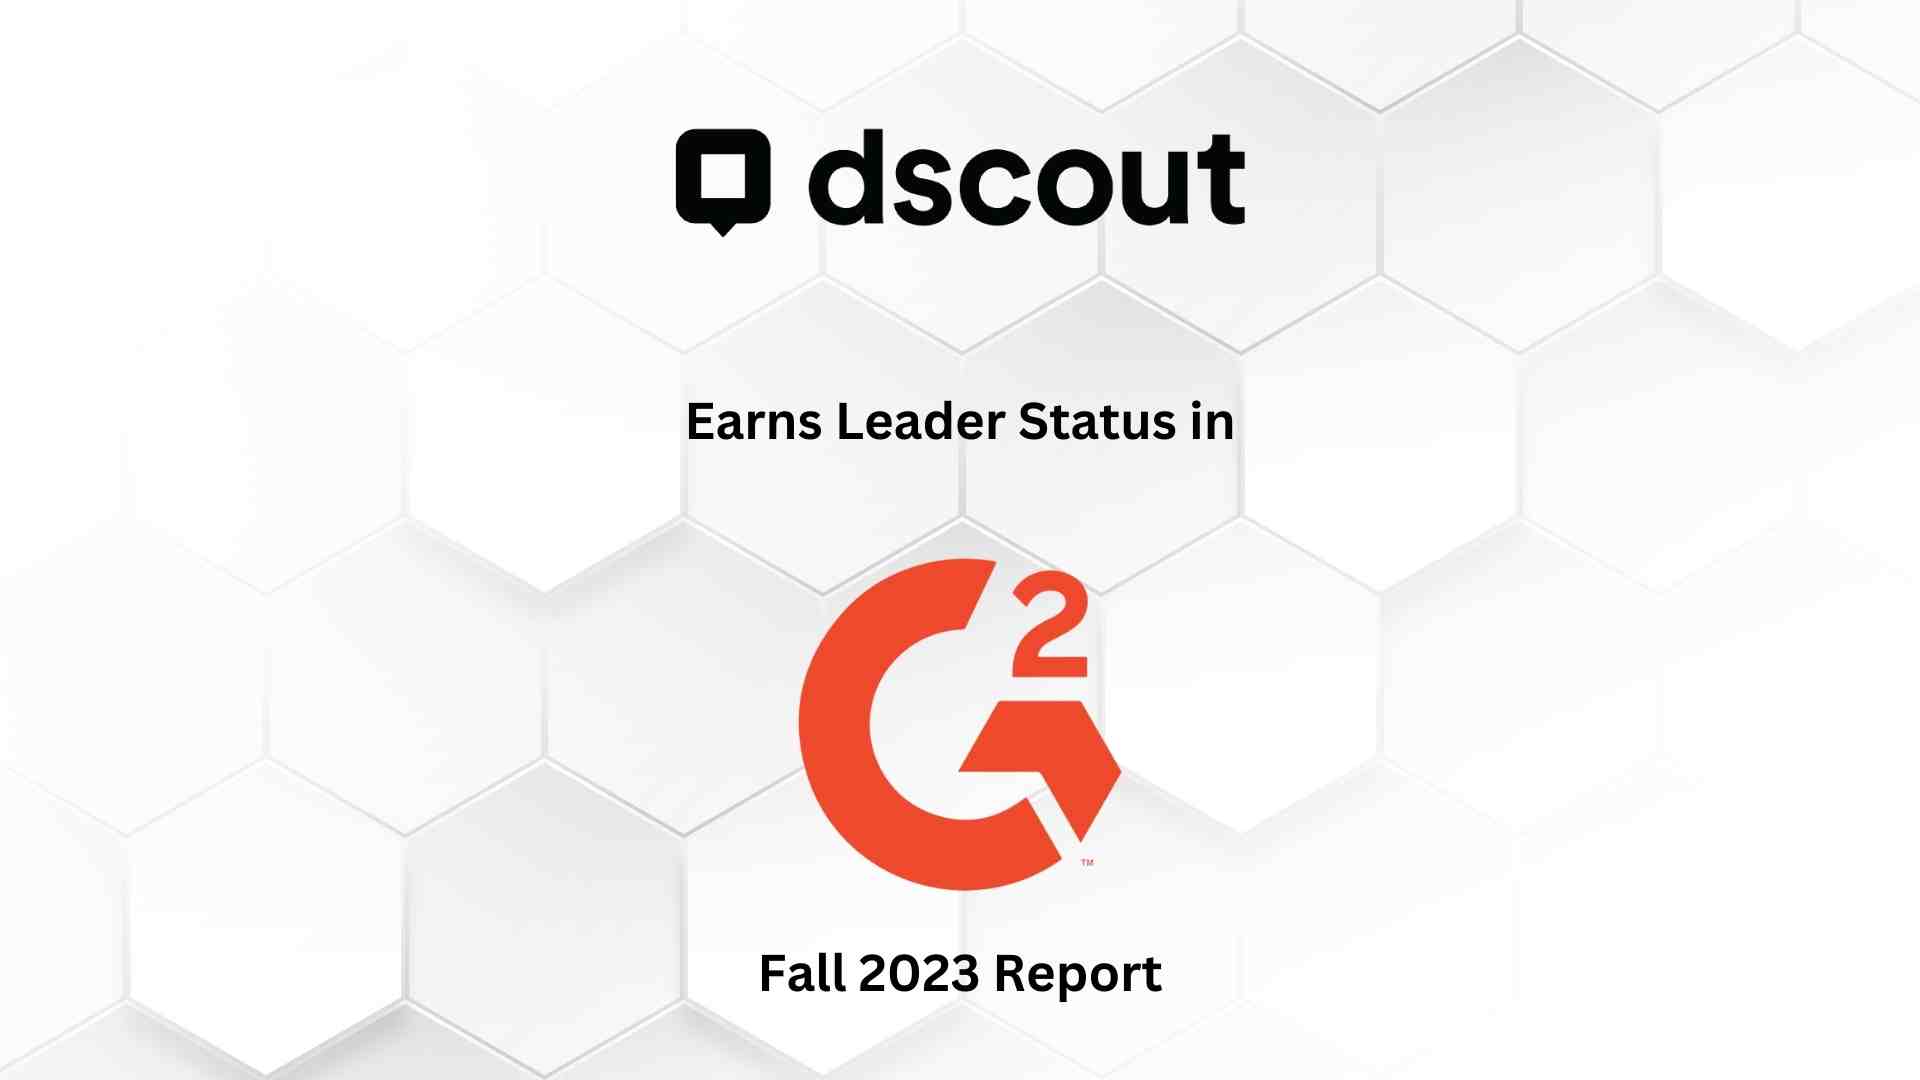 dscout Earns Leader Status in G2's Fall 2023 Report, with an Impressive 92% of Users Recommending the Company for User Research